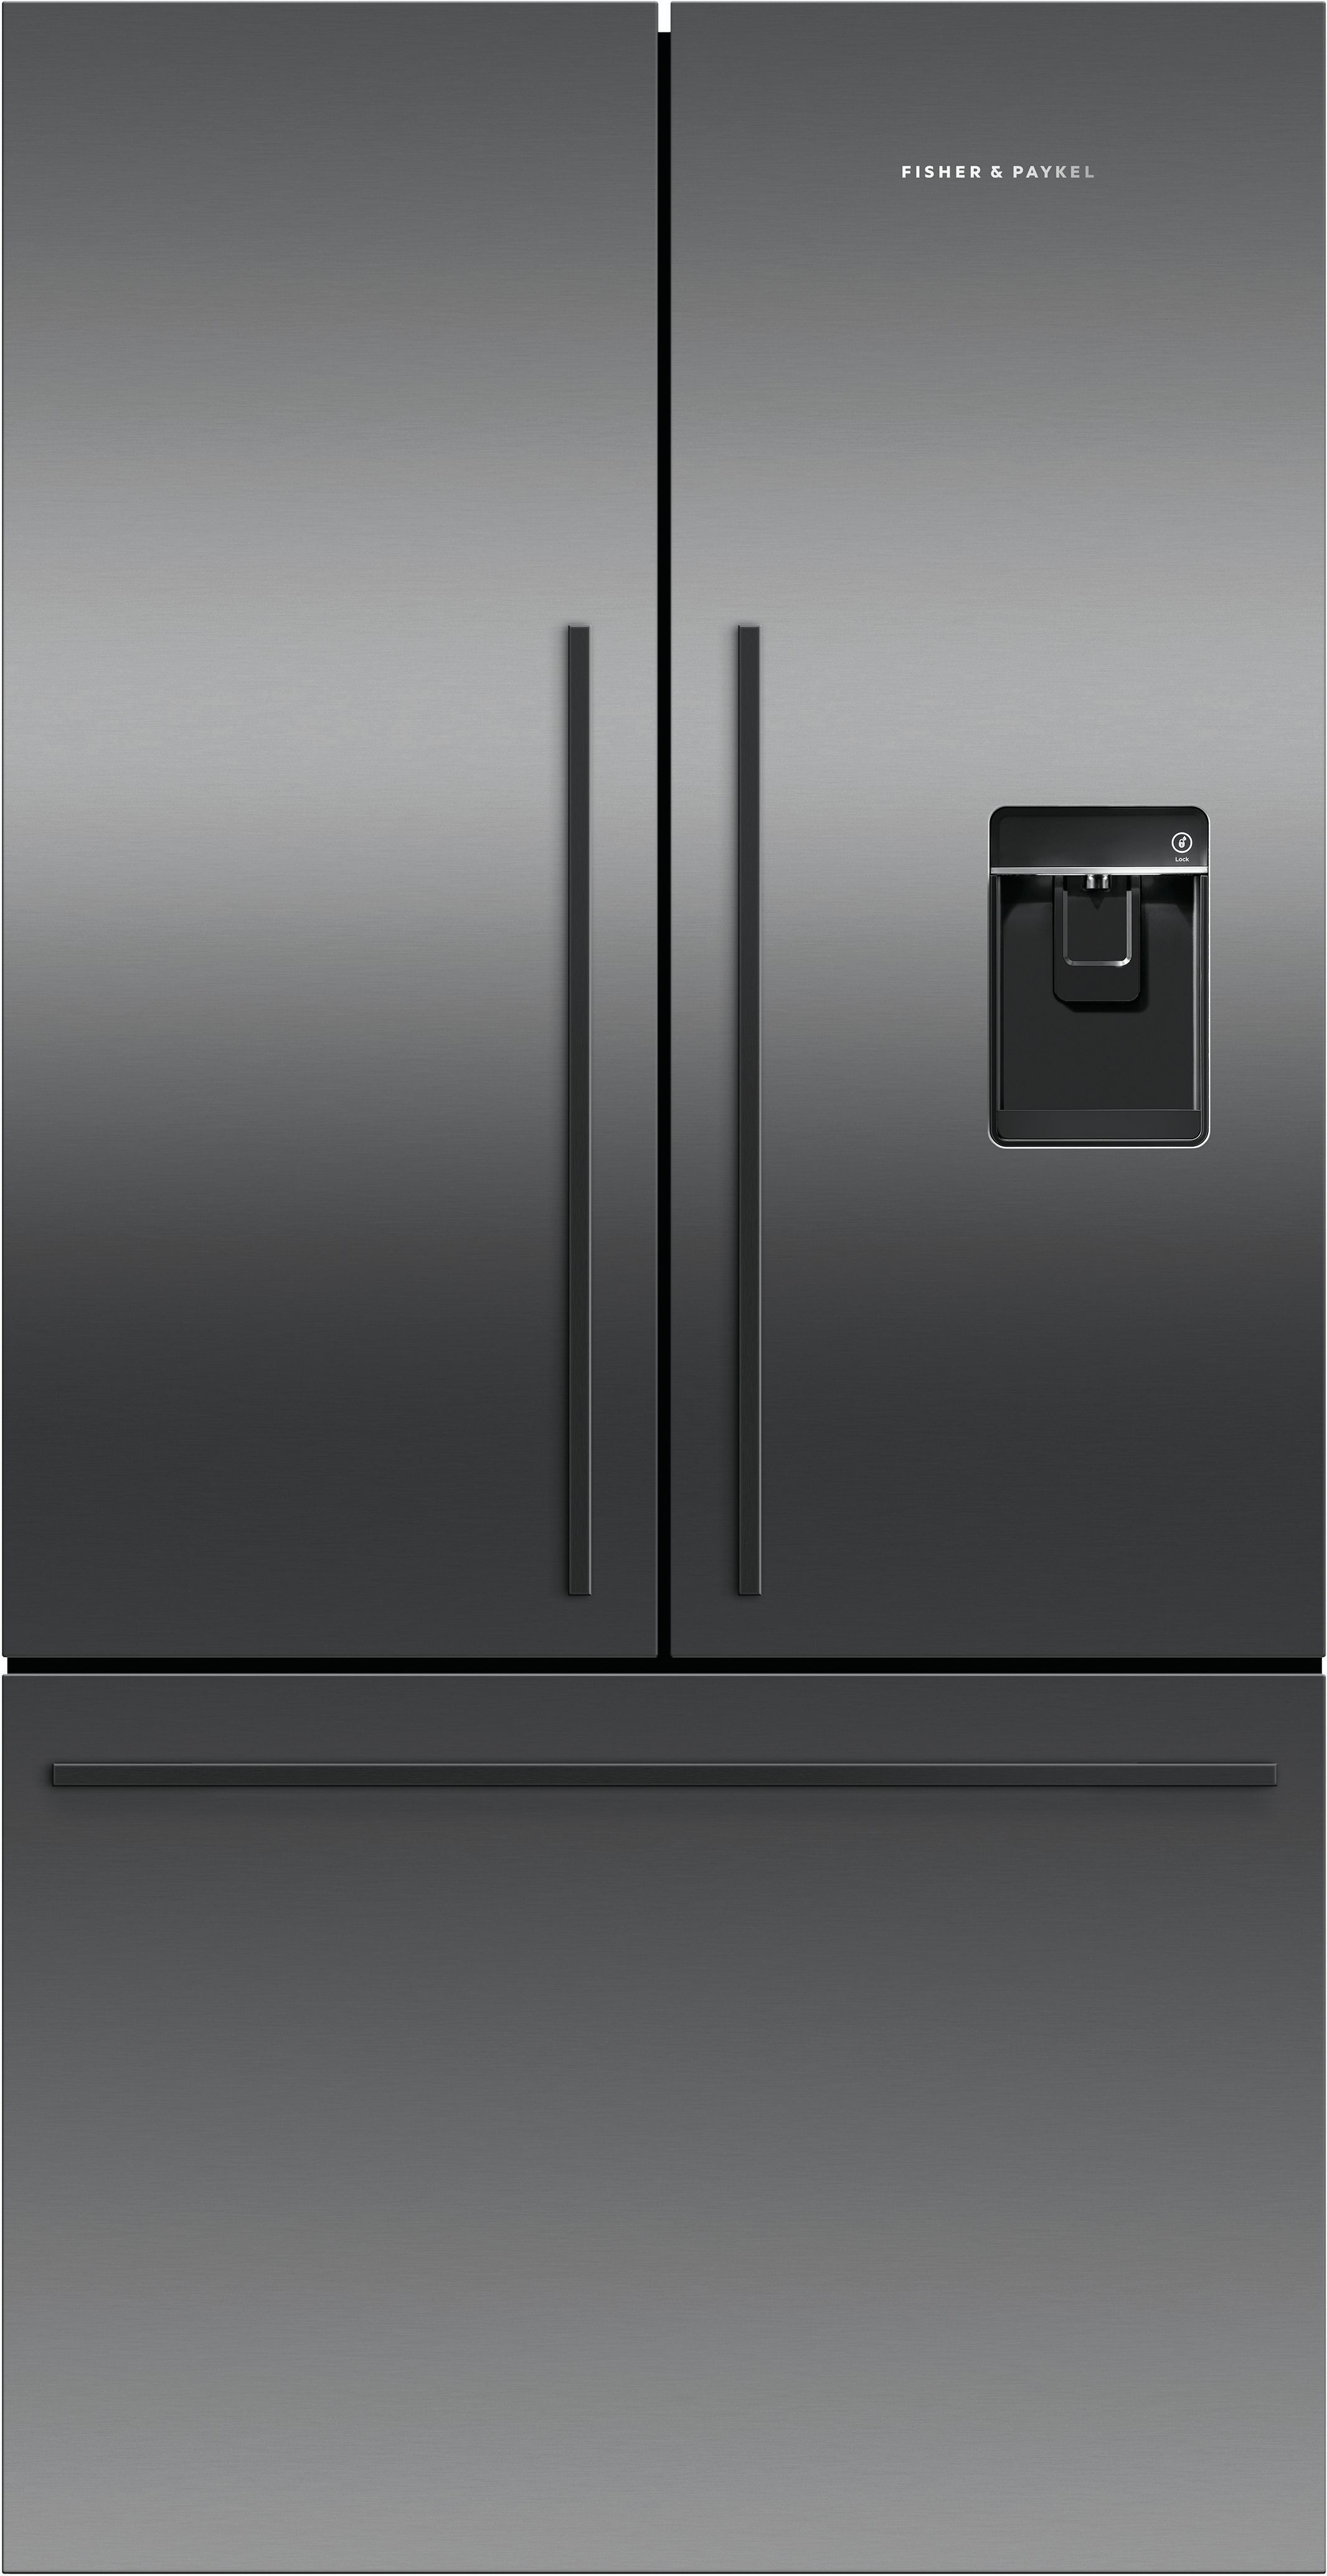 Fisher & Paykel Series 7 Contemporary RF540ADUB7 Wifi Connected Plumbed Frost Free American Fridge Freezer - Black Steel - E Rated, Black